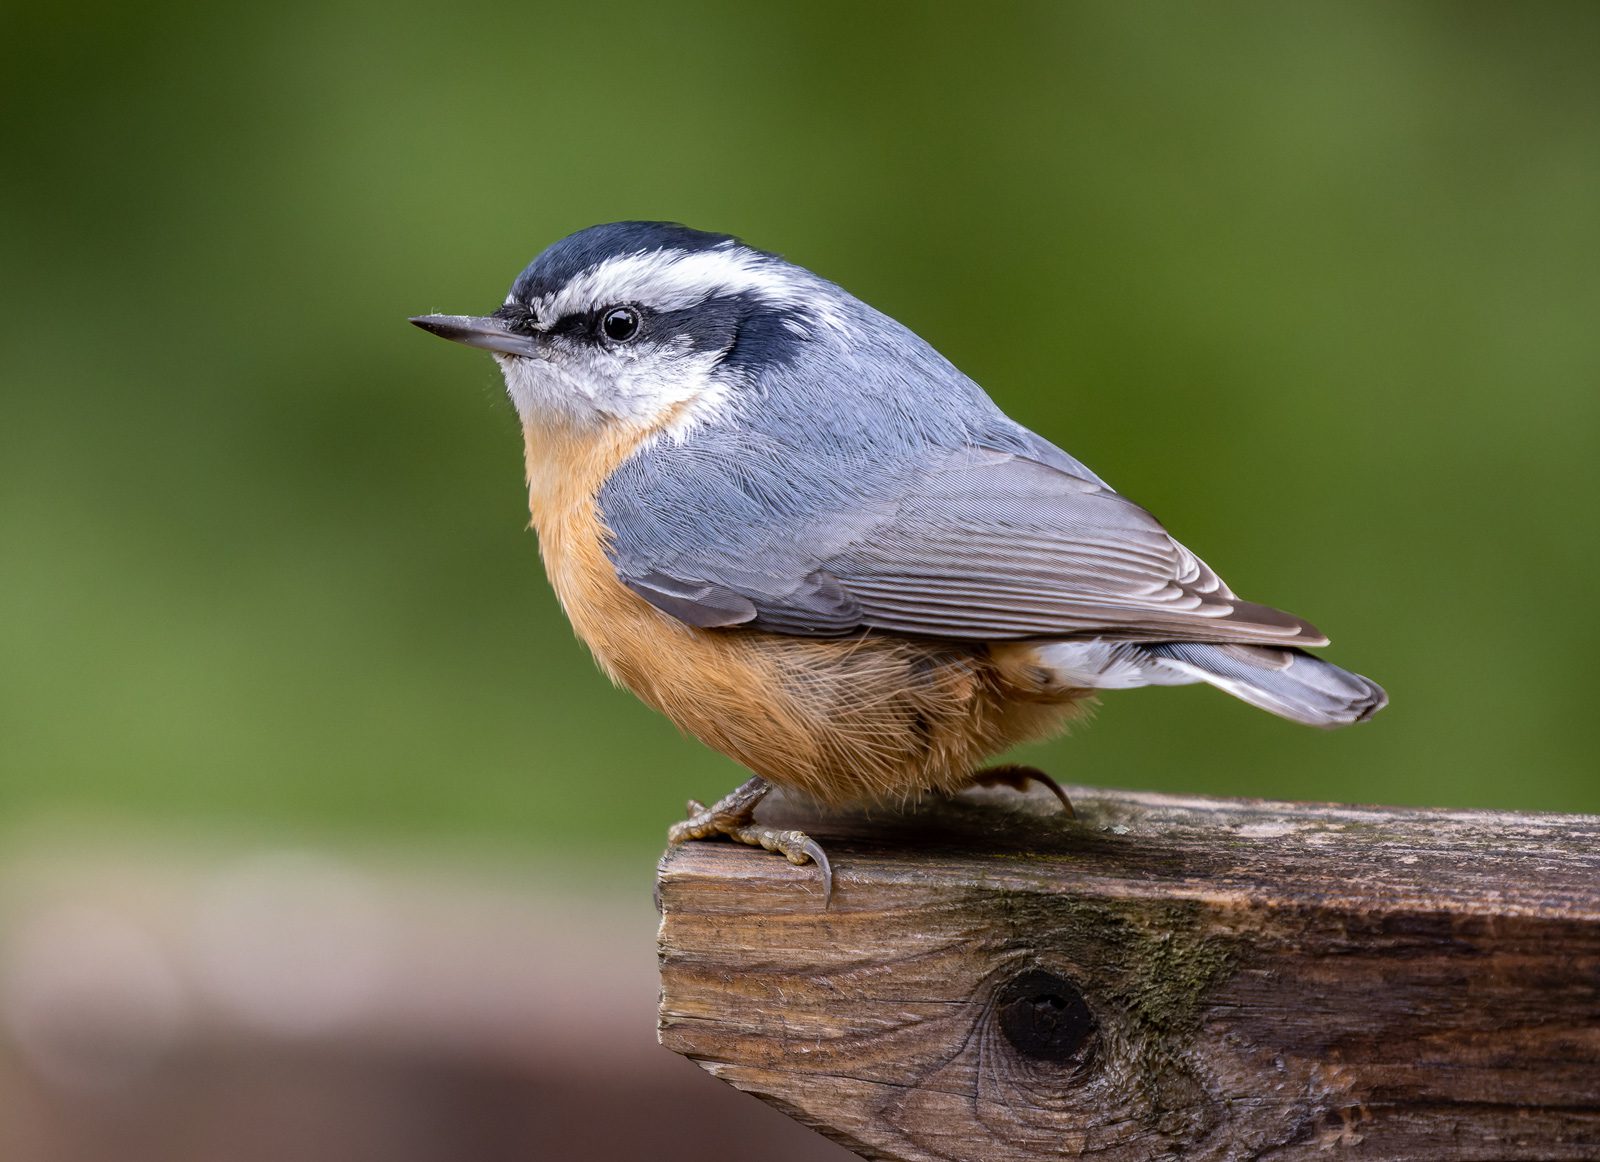 Red-breasted Nuthatches are a well known 